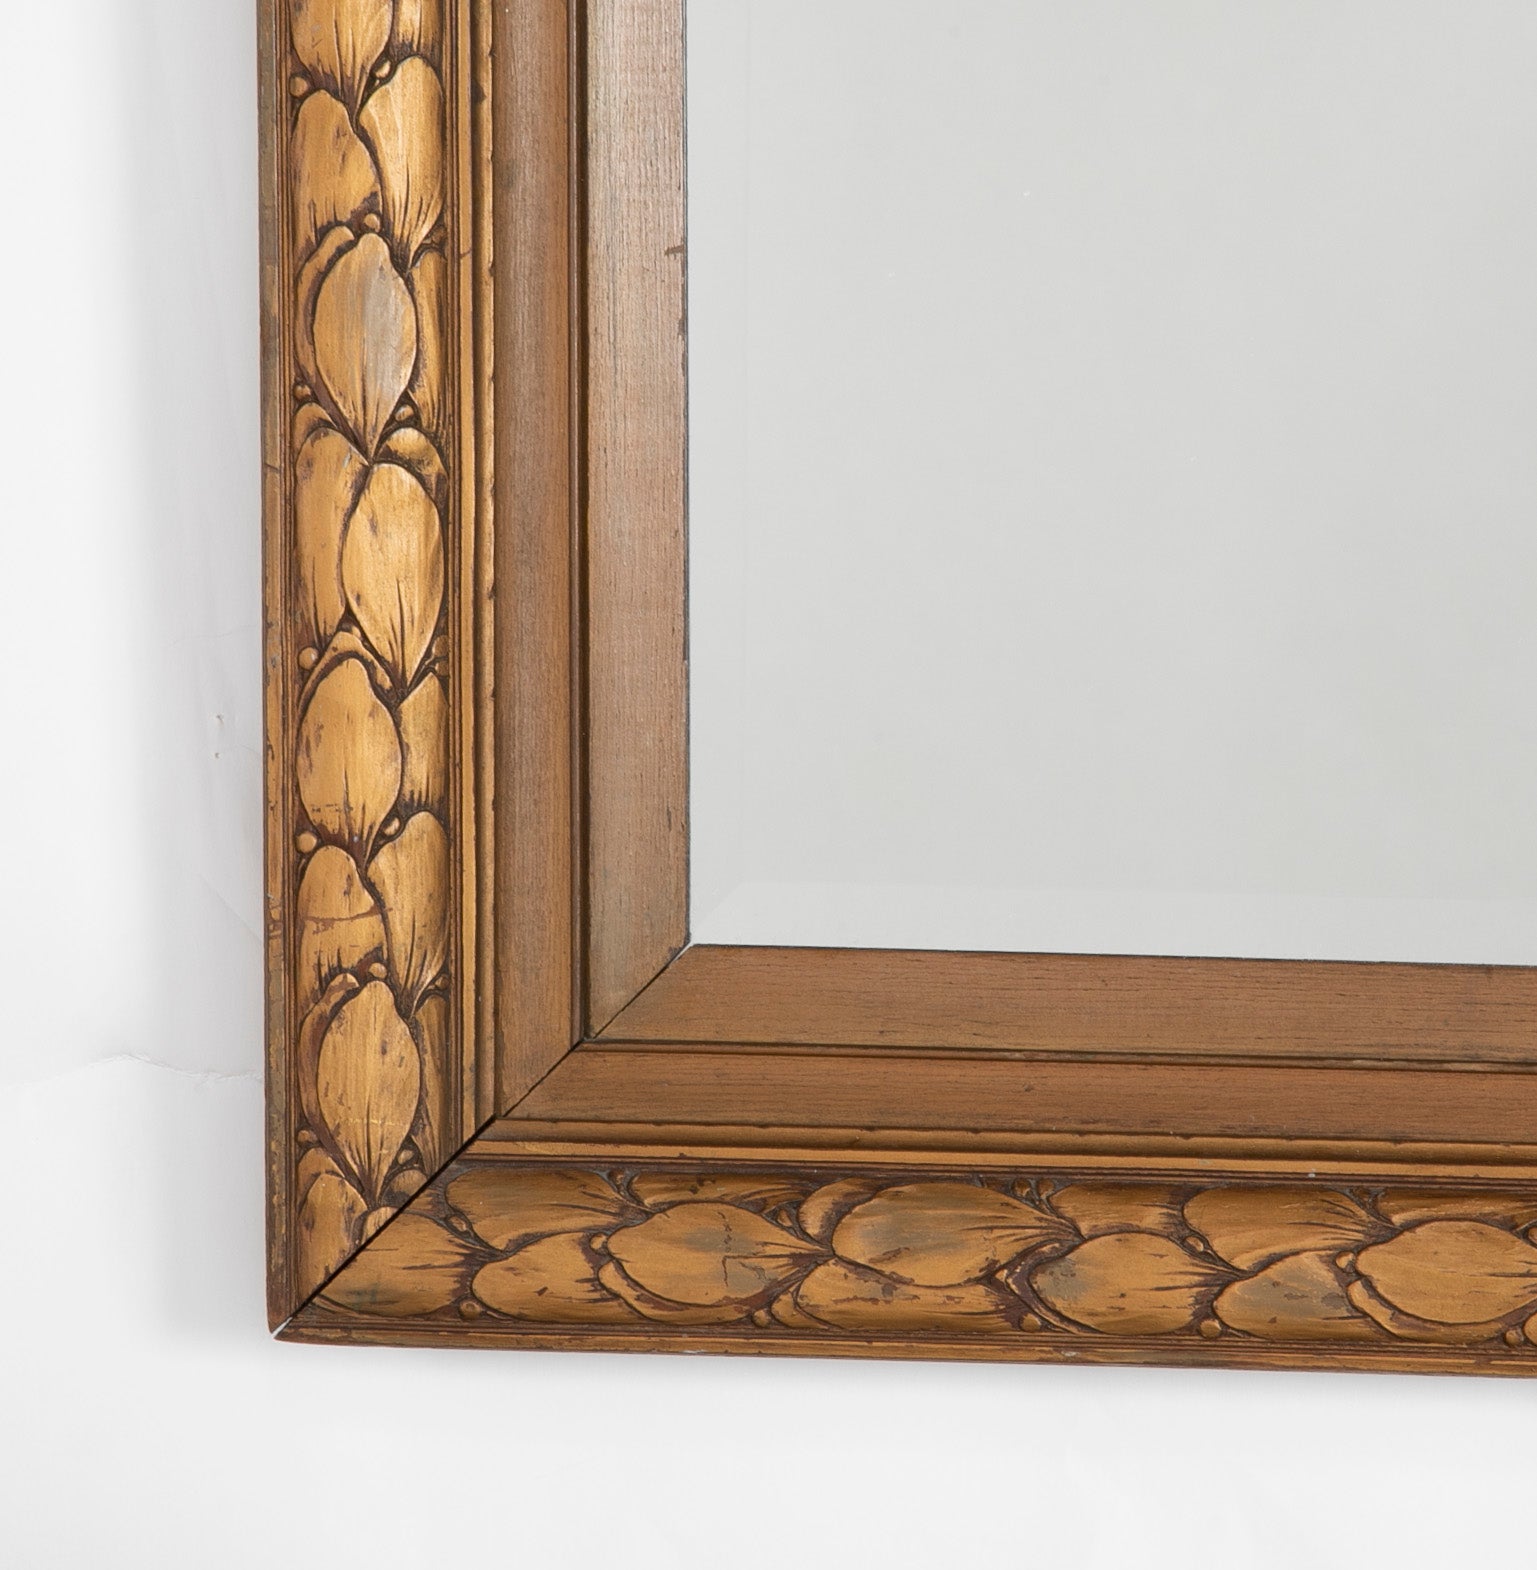 Art Deco Period Gilt Wood Picture Frame now a Mirror